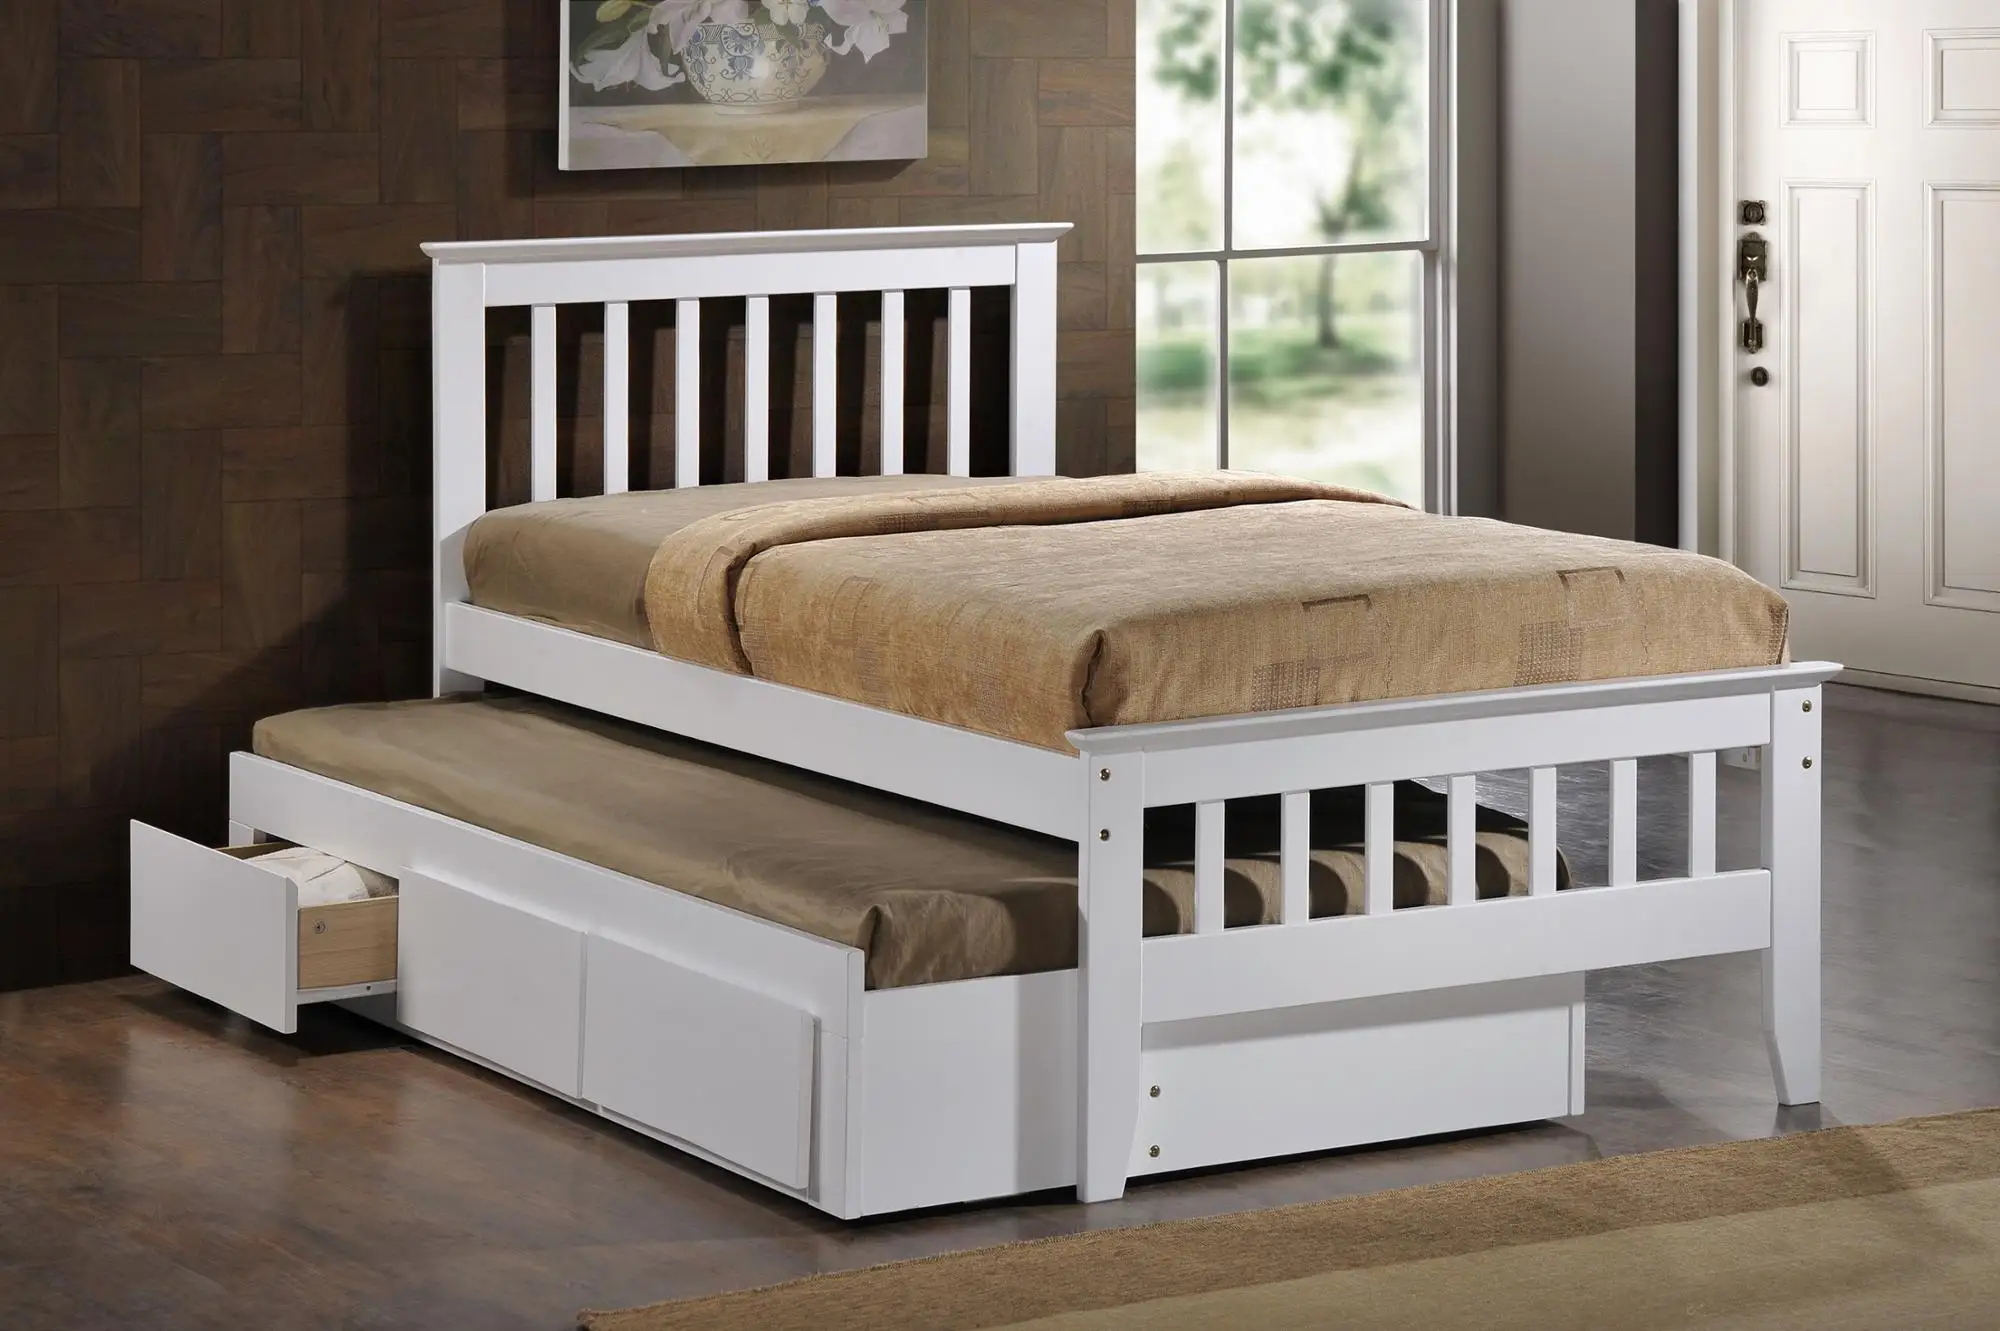 king single bed frame with drawers